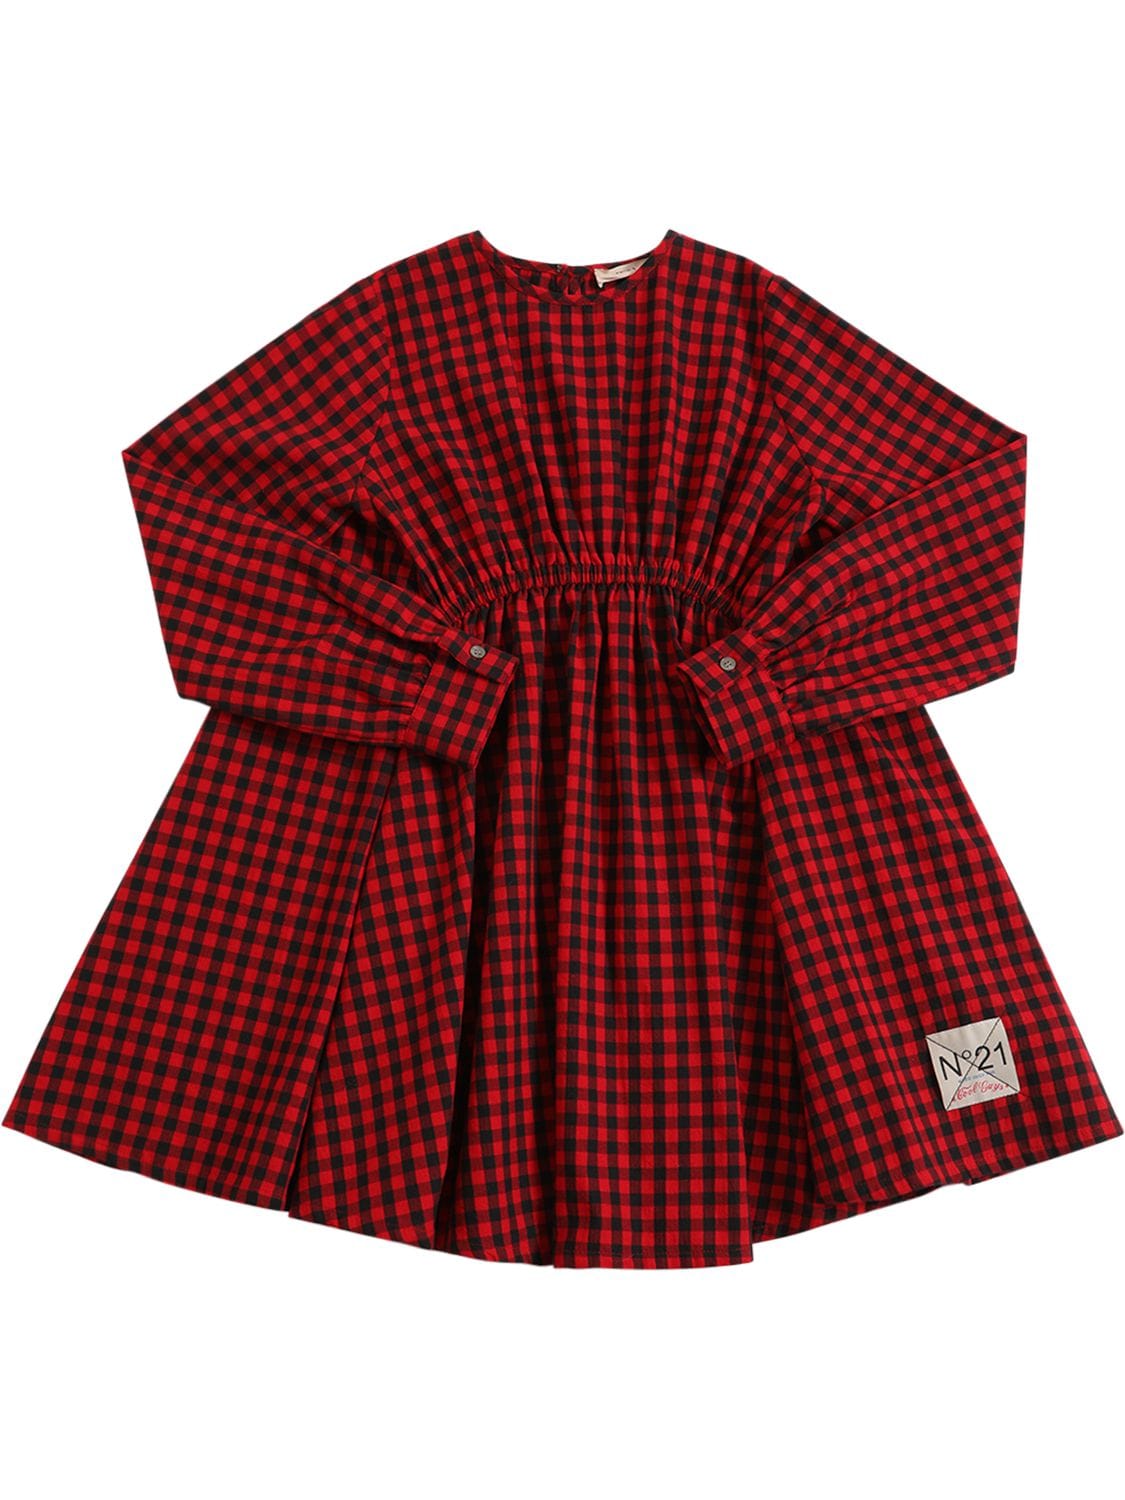 Image of Checked Print Cotton Dress